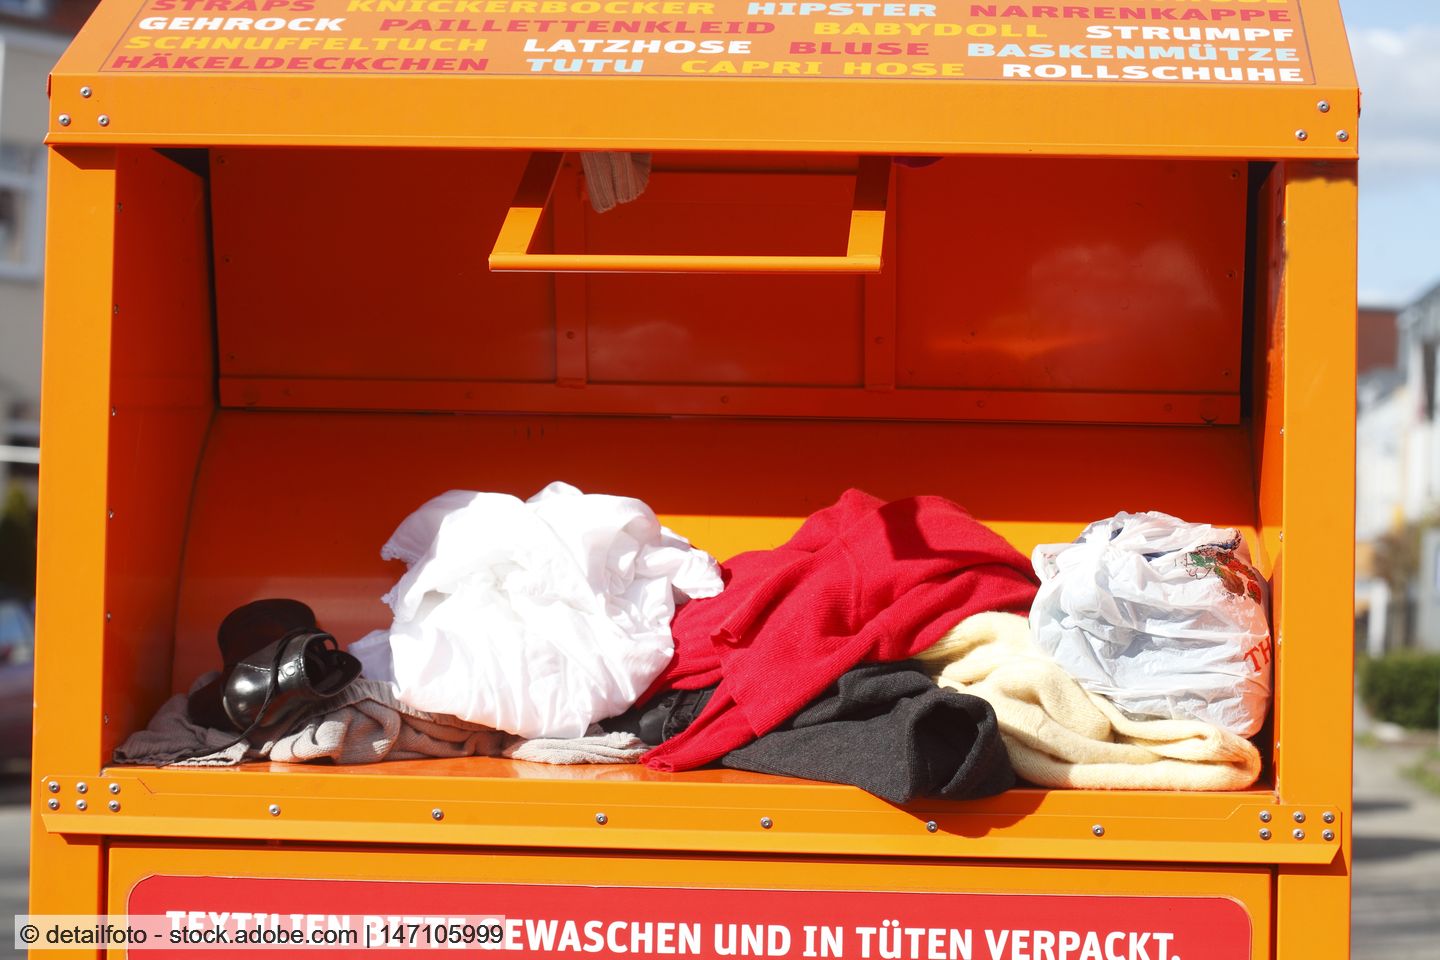 Different clothing items in the chute of a textile recycling bank